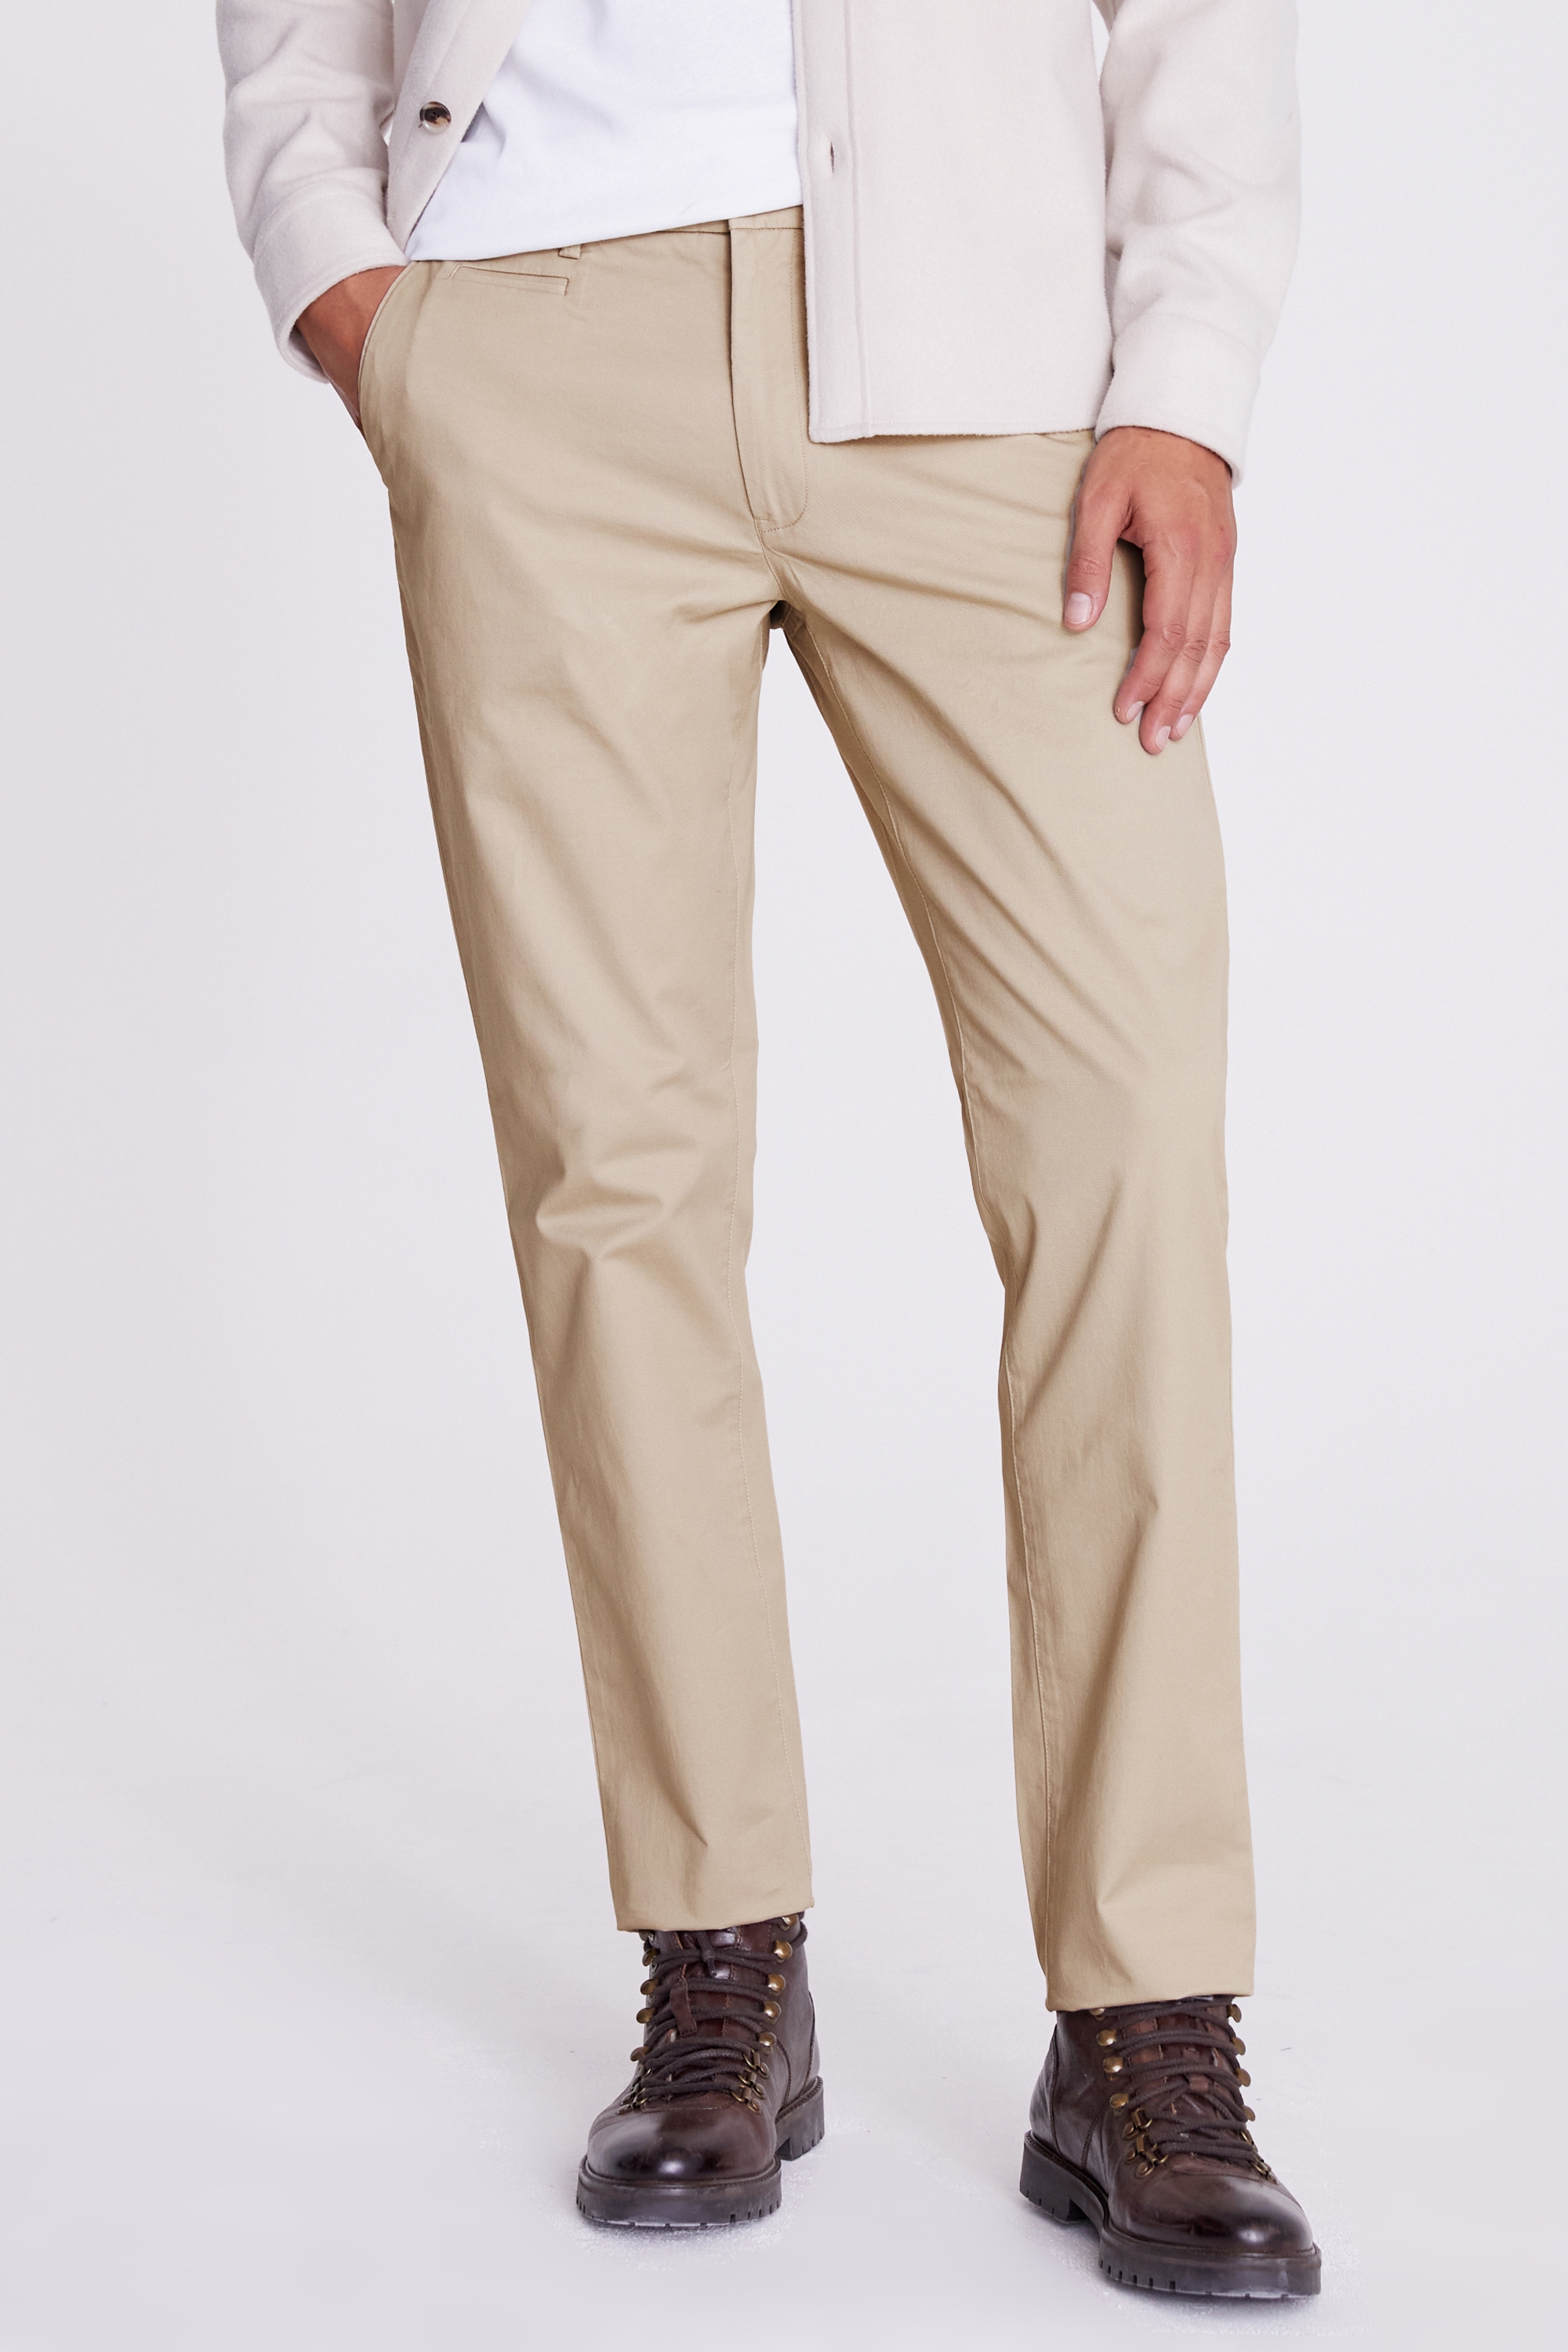 Moss 1851 Tailored Fit Stone Stretch Chino